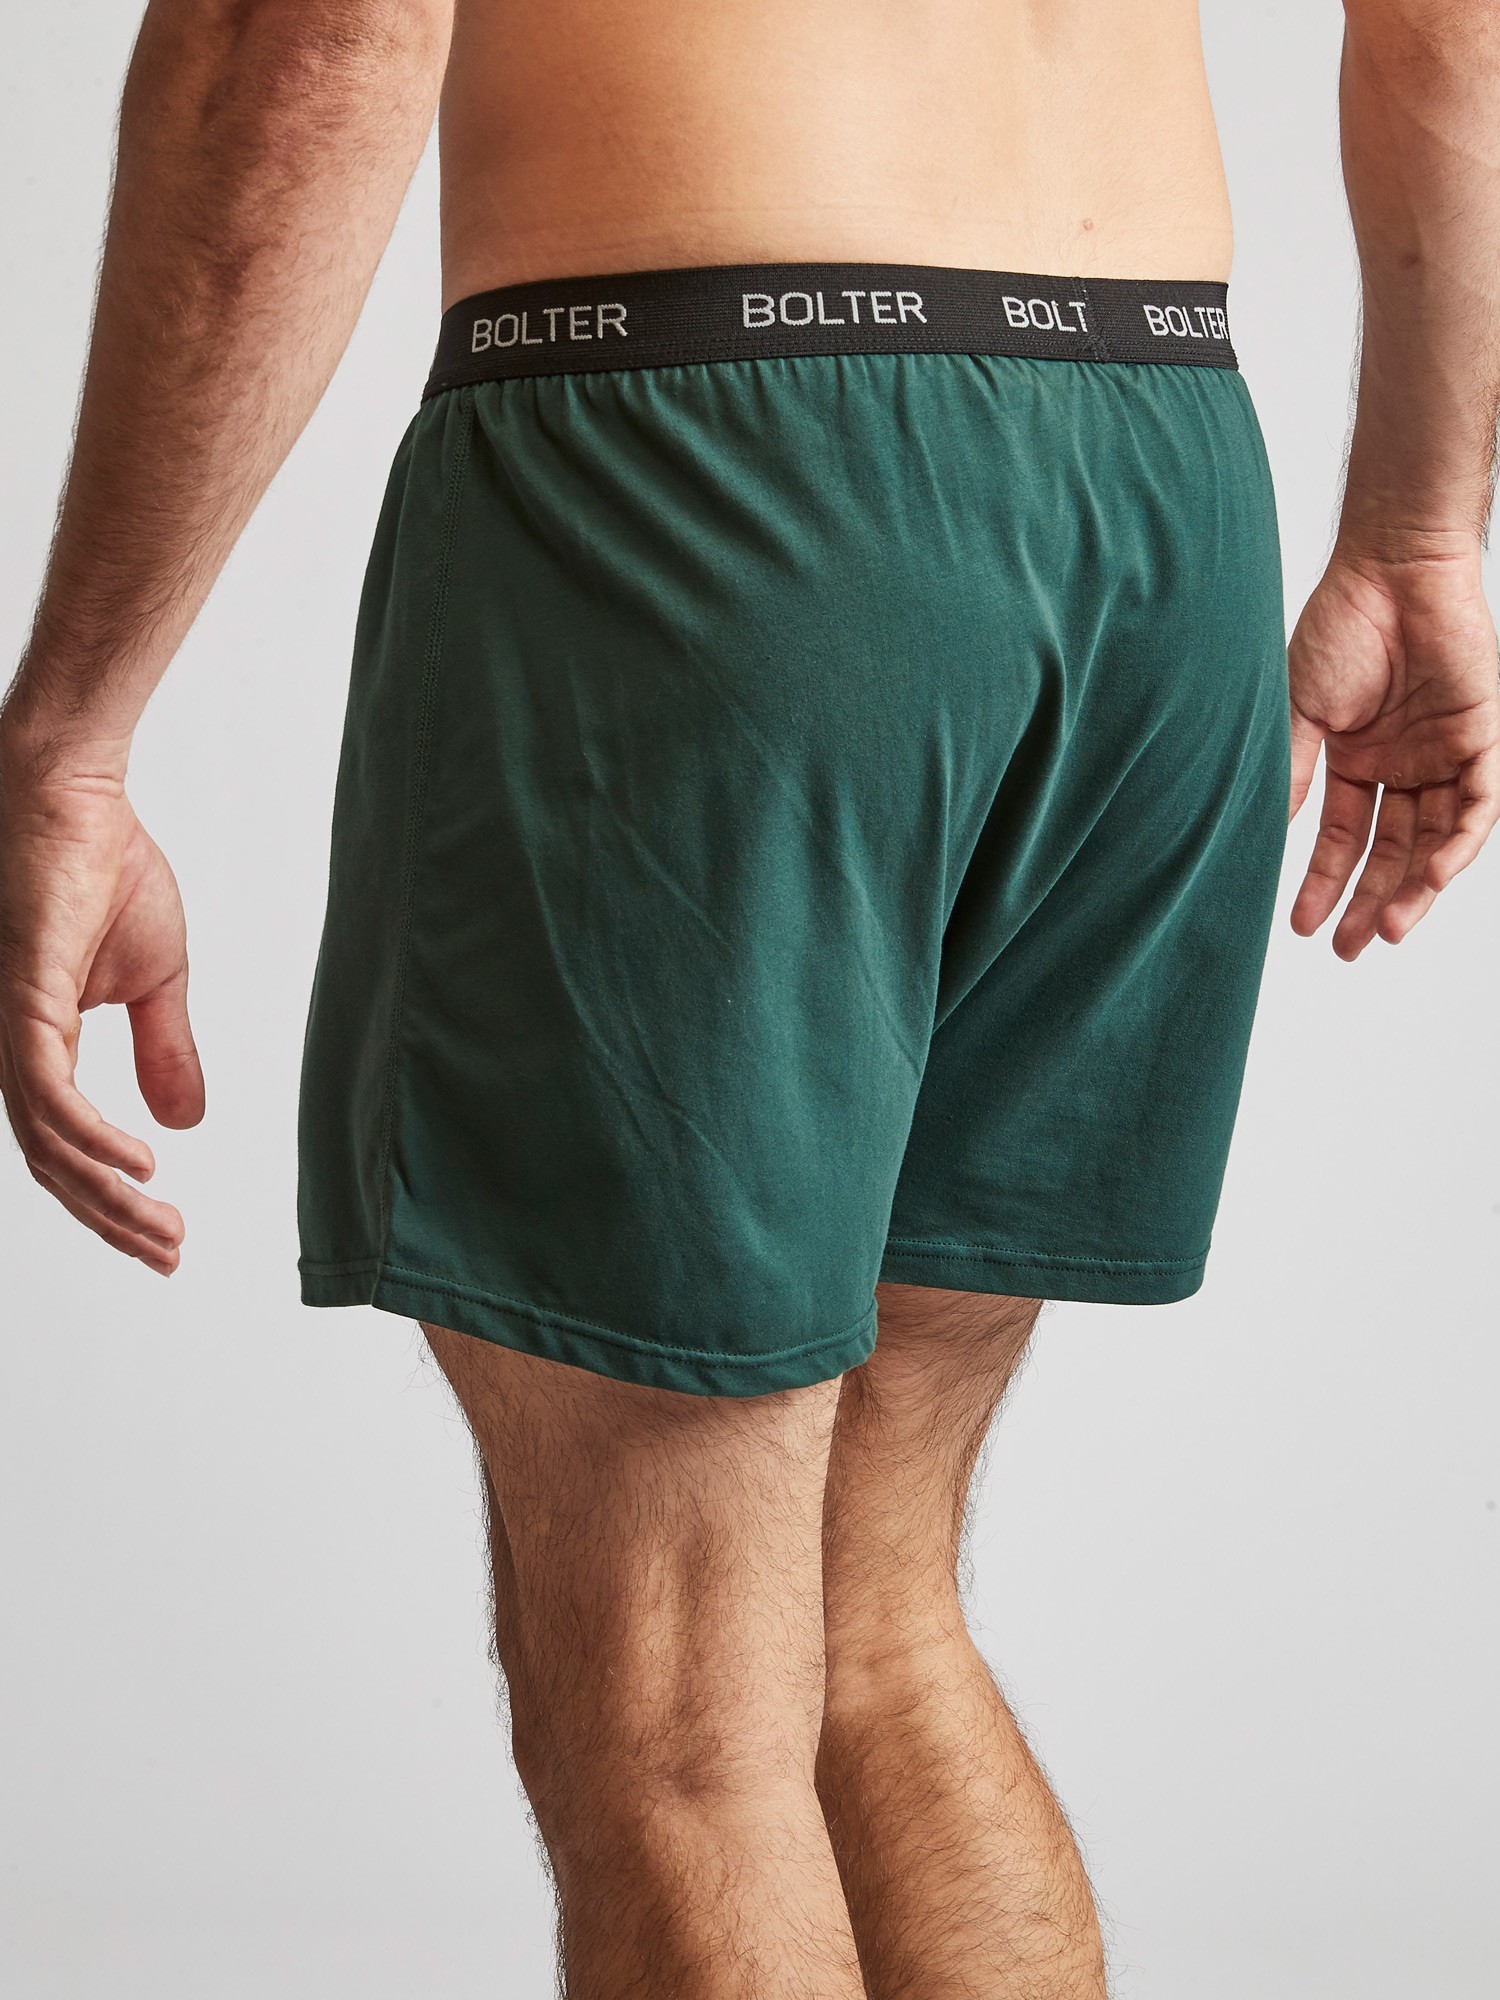 Bolter Men's 5-Pack Cotton Stretch Boxers Shorts (XXX-Large, Greens) - image 3 of 11